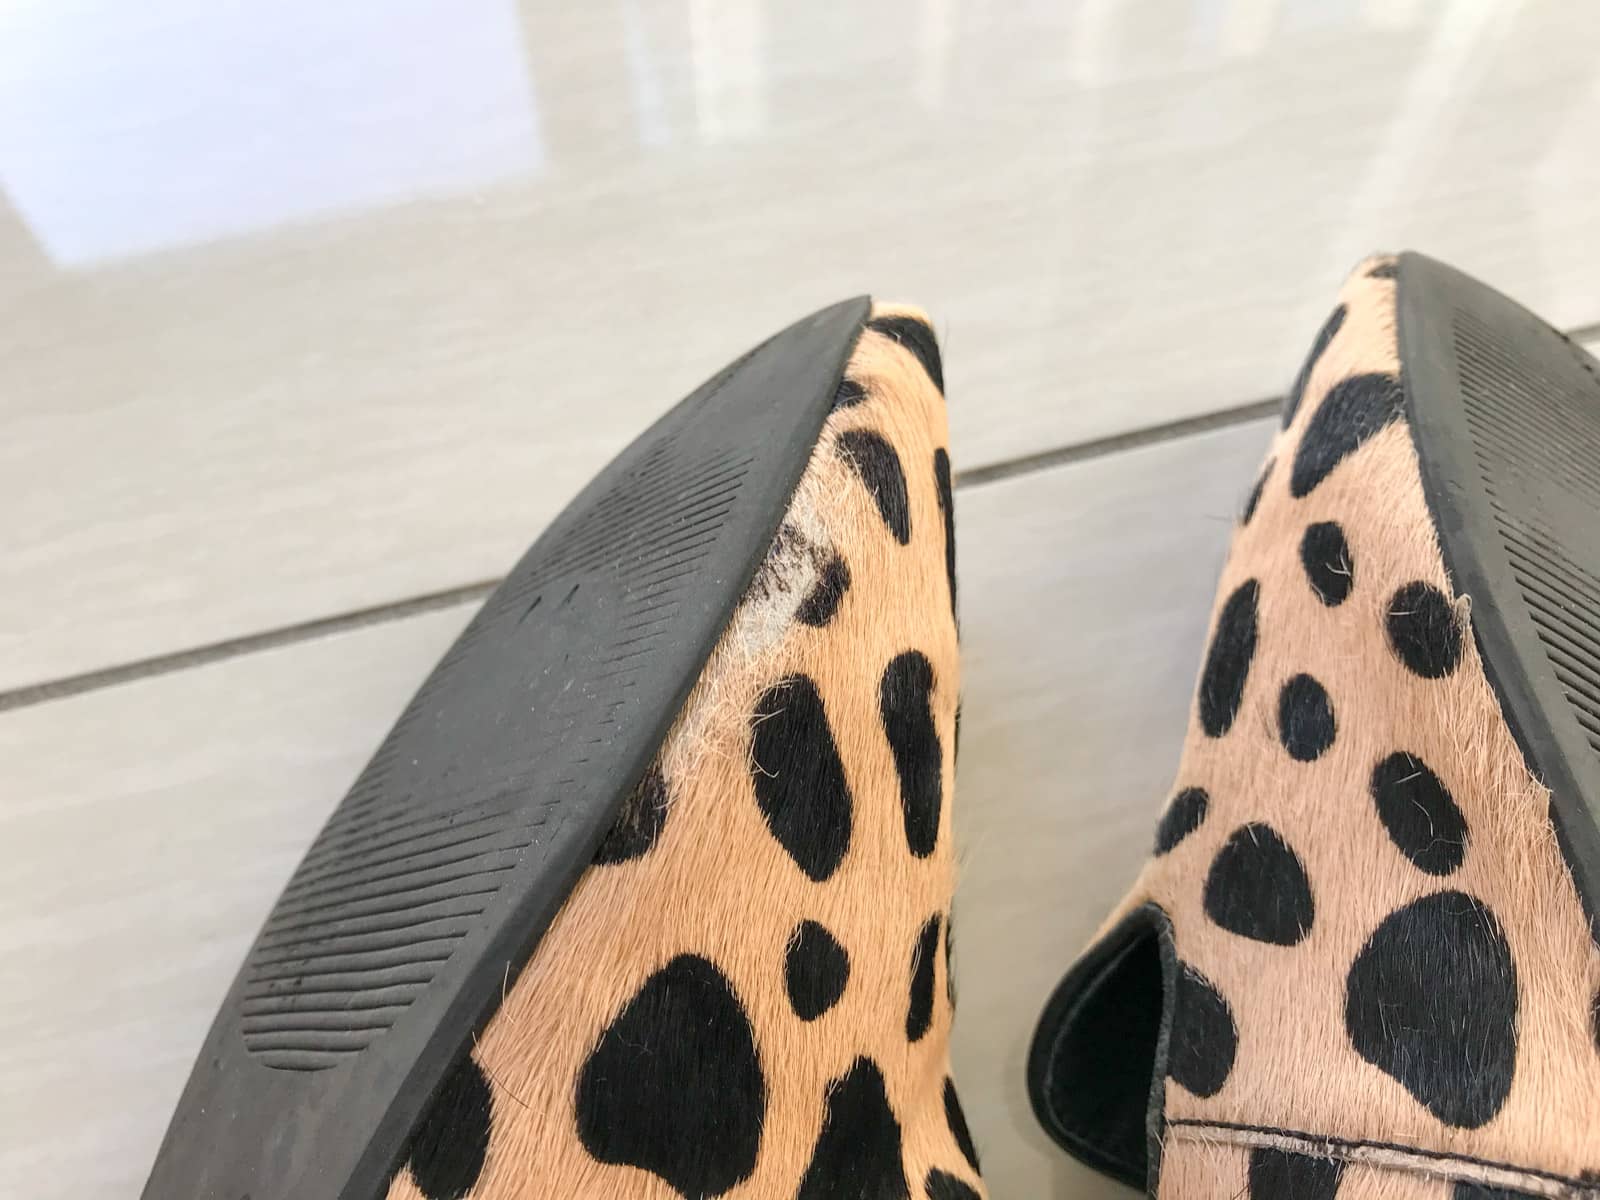 A close-up of a sand-coloured shoe with a black giraffe spot pattern. The shoe has a pony hair texture which is wearing off